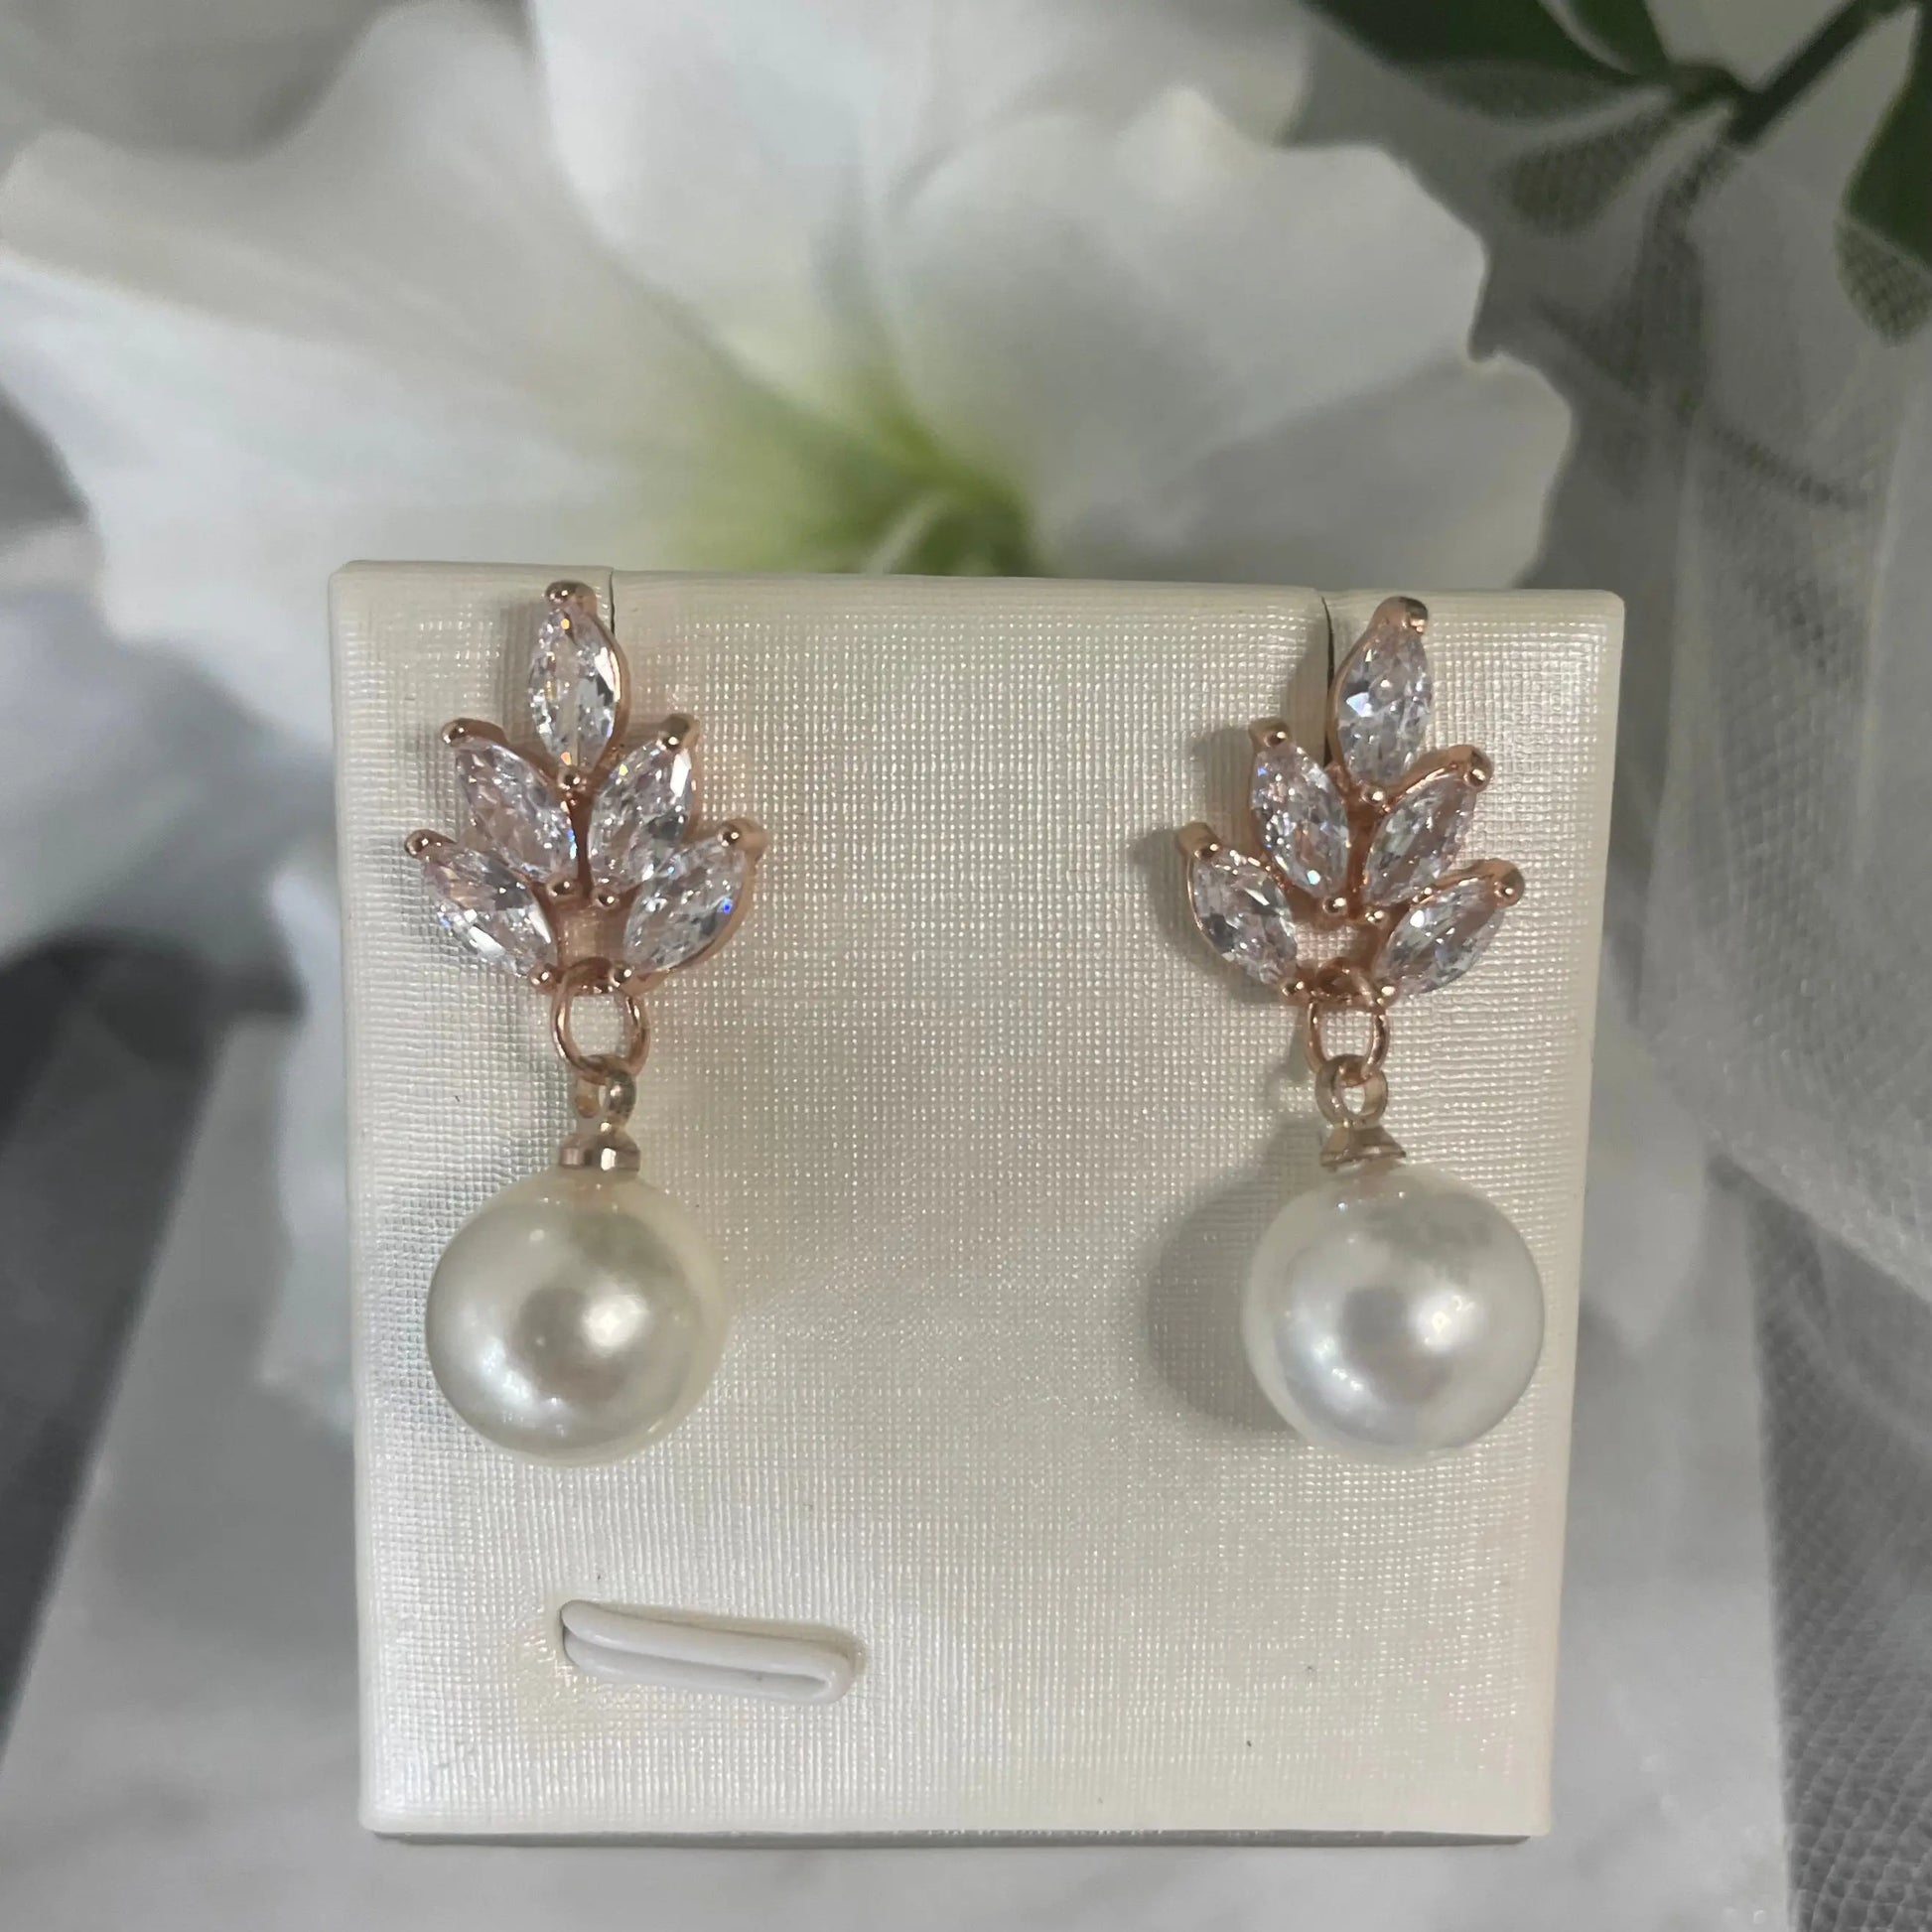 Earrings in Rose Gold: Elegant rose gold earrings with a leaf design and dangling teardrop pearls.